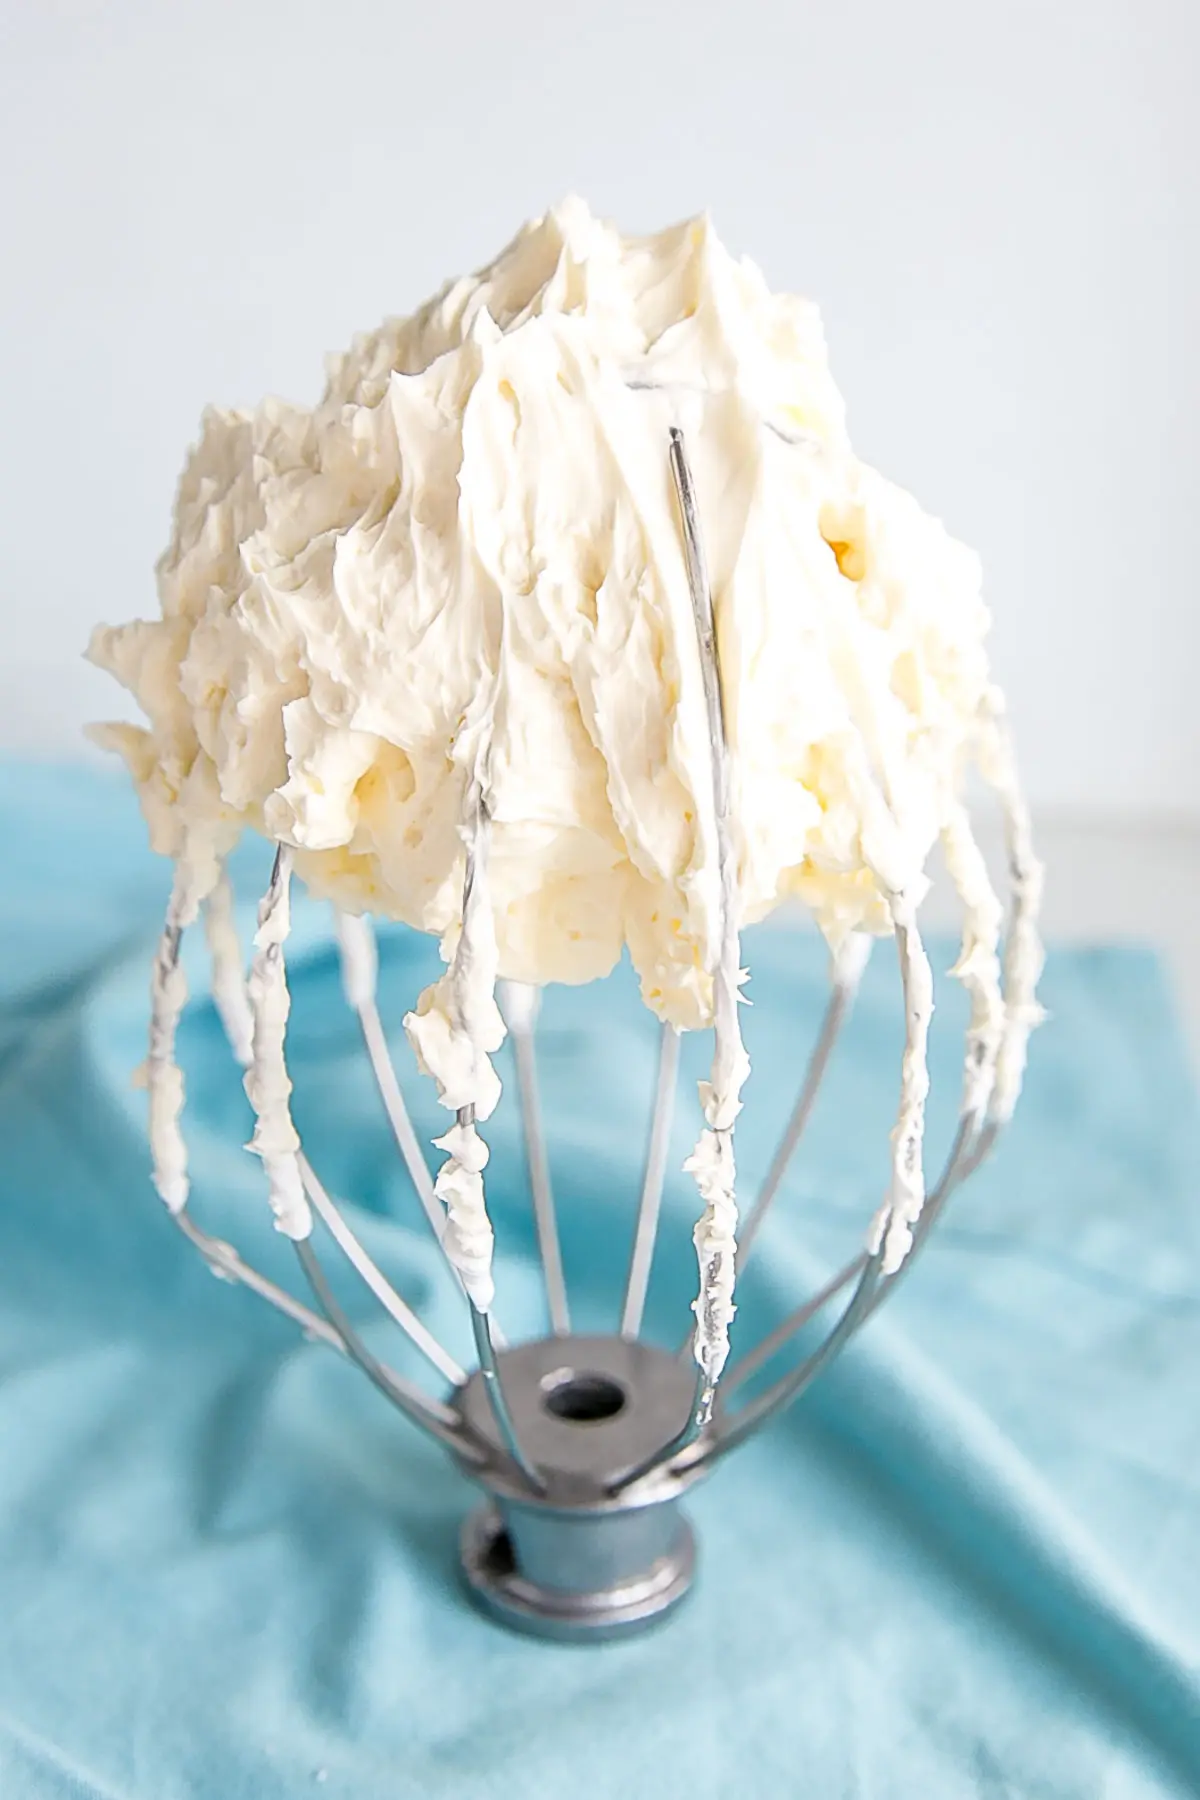 Swiss meringue buttercream on a stand mixer whisk.